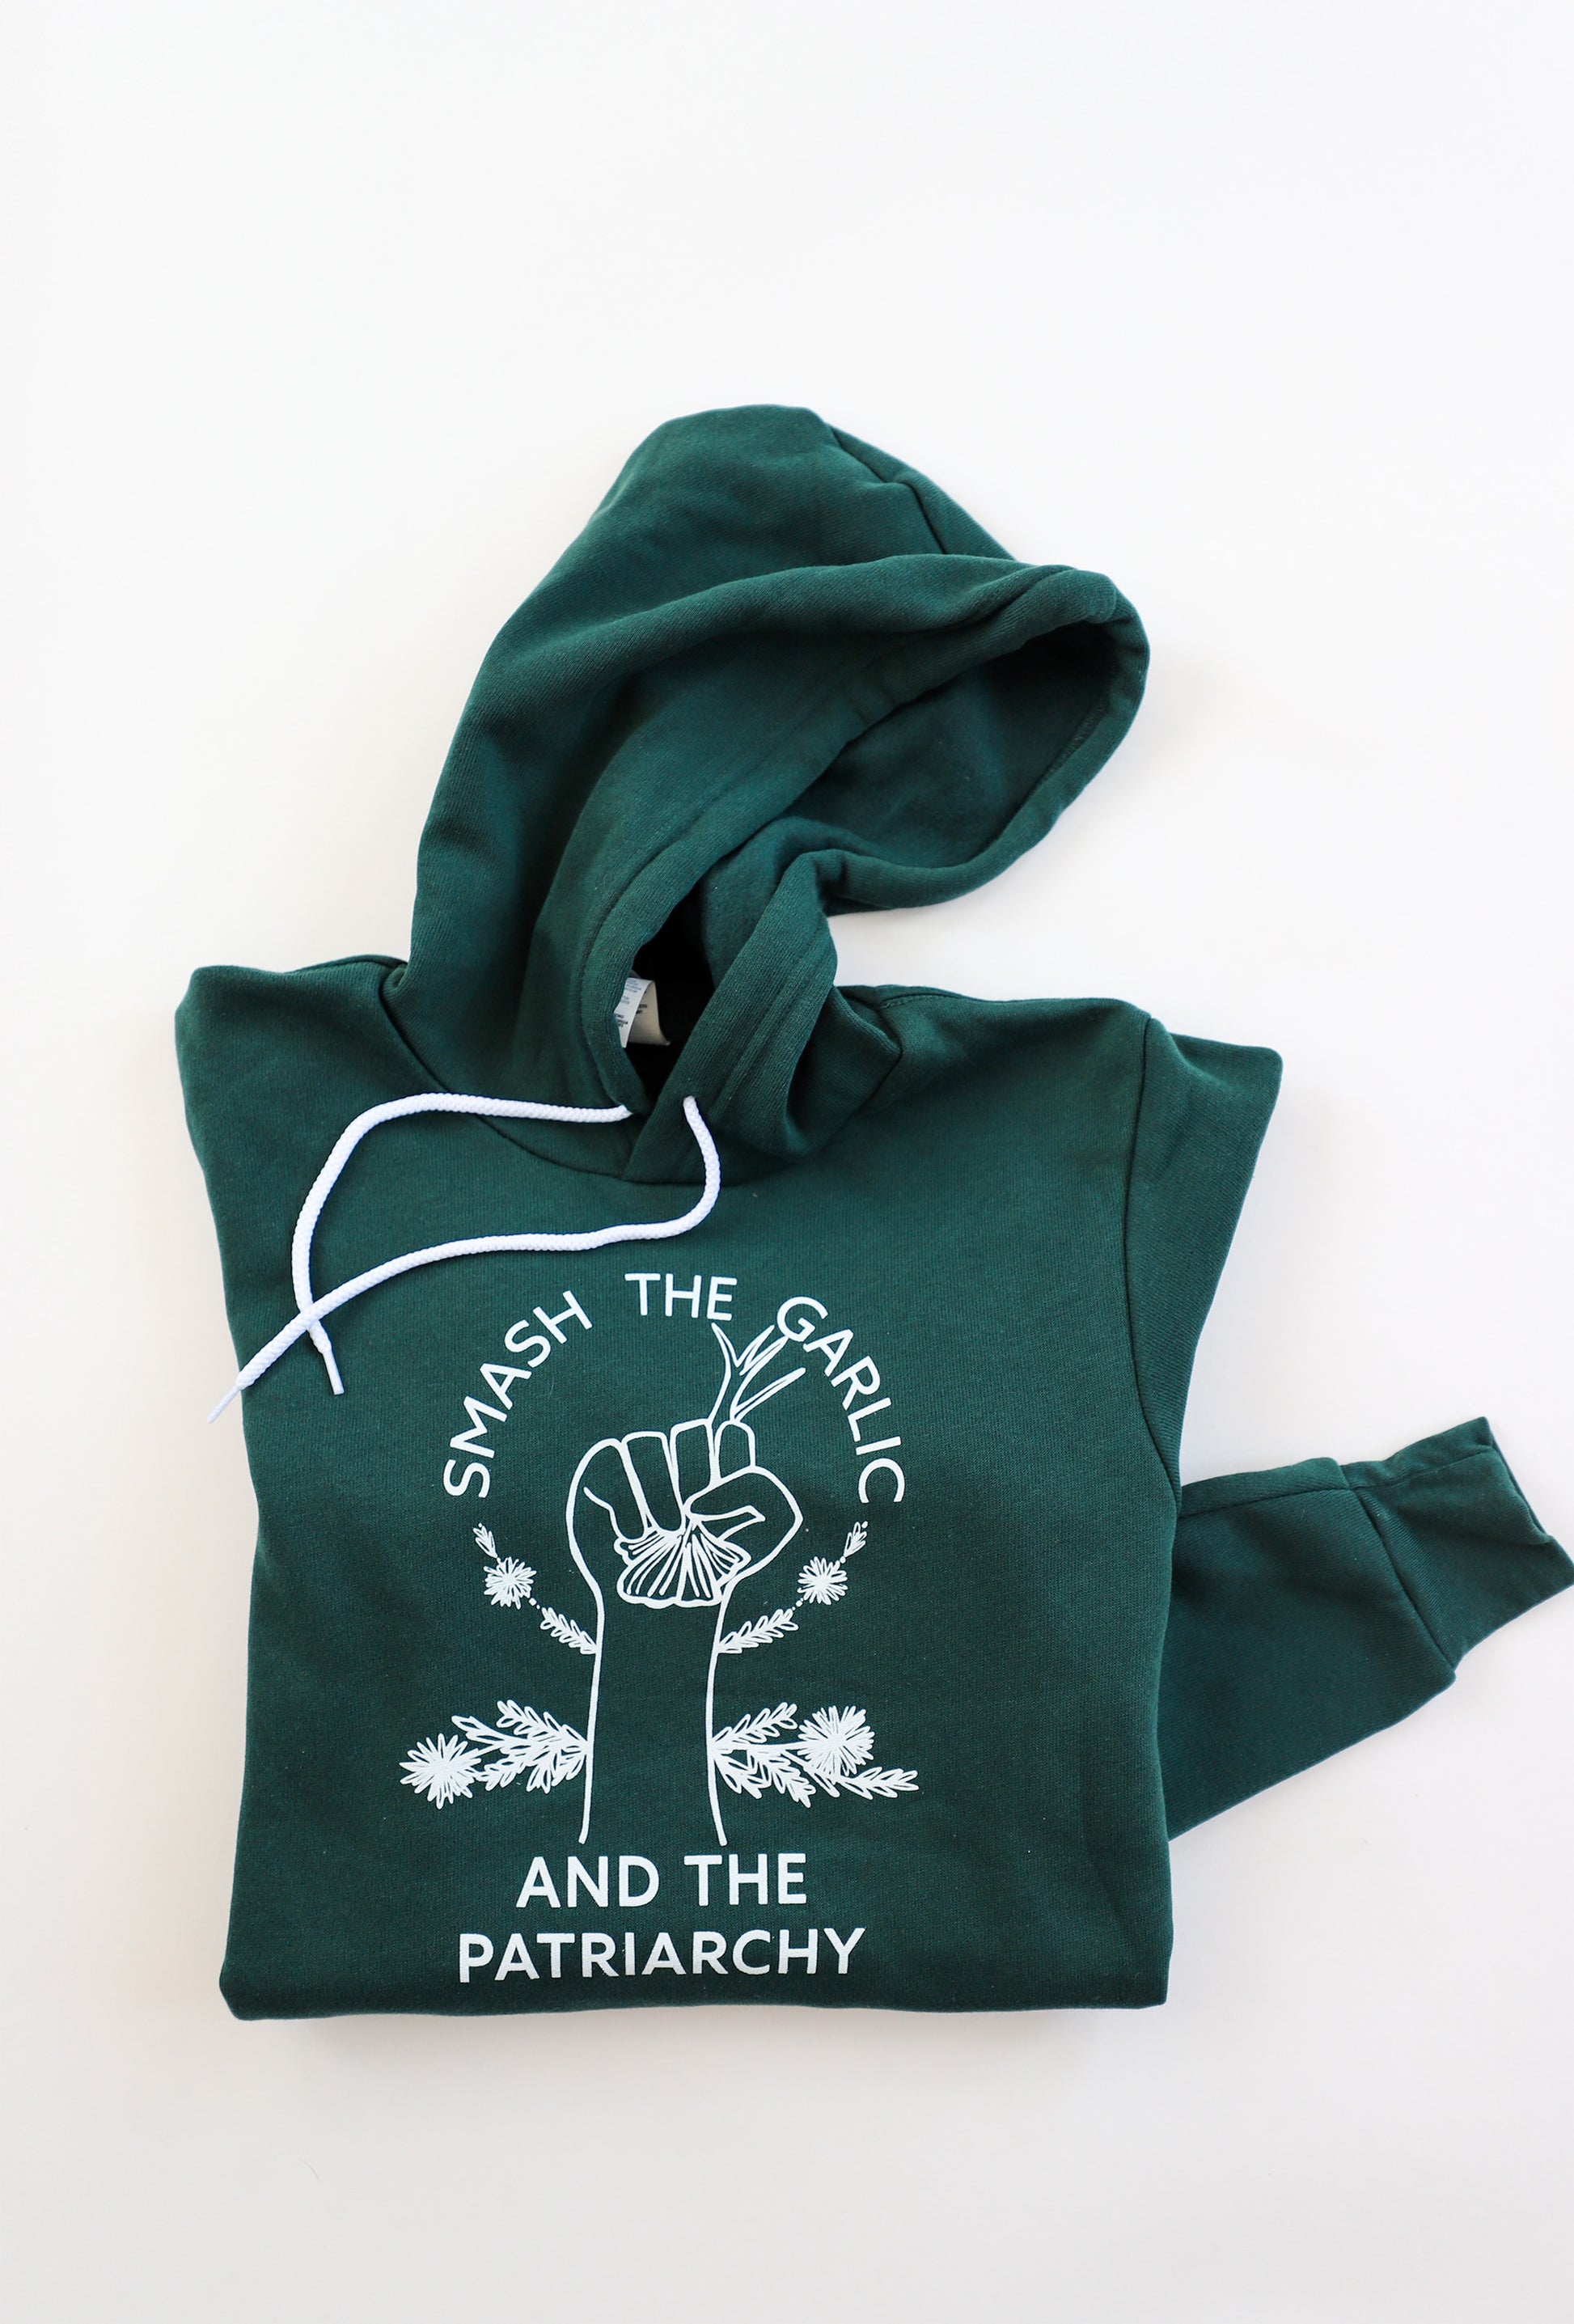 A folded forest green hoodie with the words "Smash the Garlic and the Patriarchy" with an illustration of a hand holding garlic